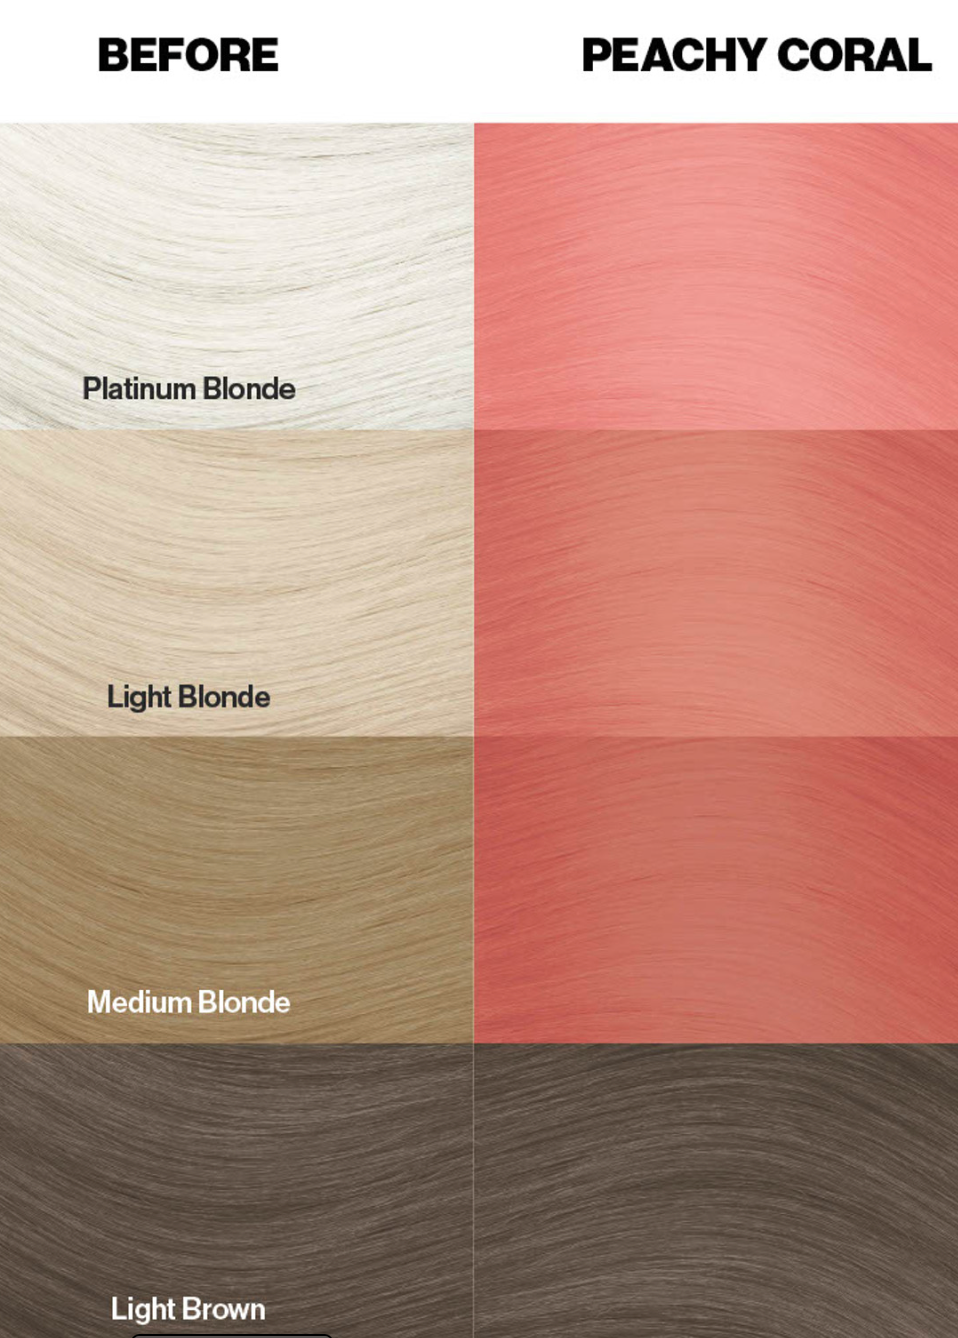 the different shades of hair are shown